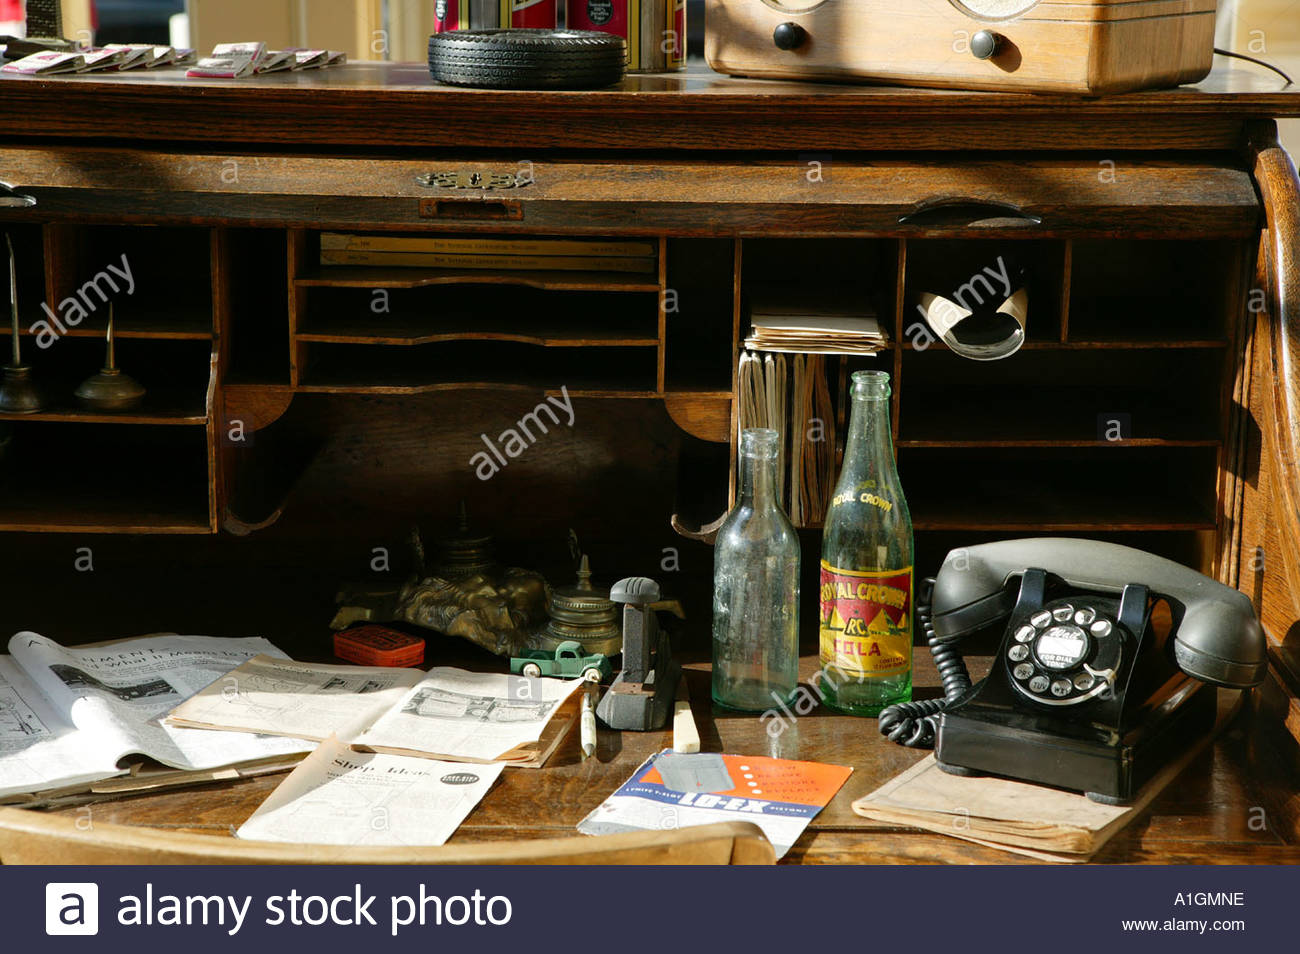 Old Desk And Phone Stock Photo 5860189 Alamy